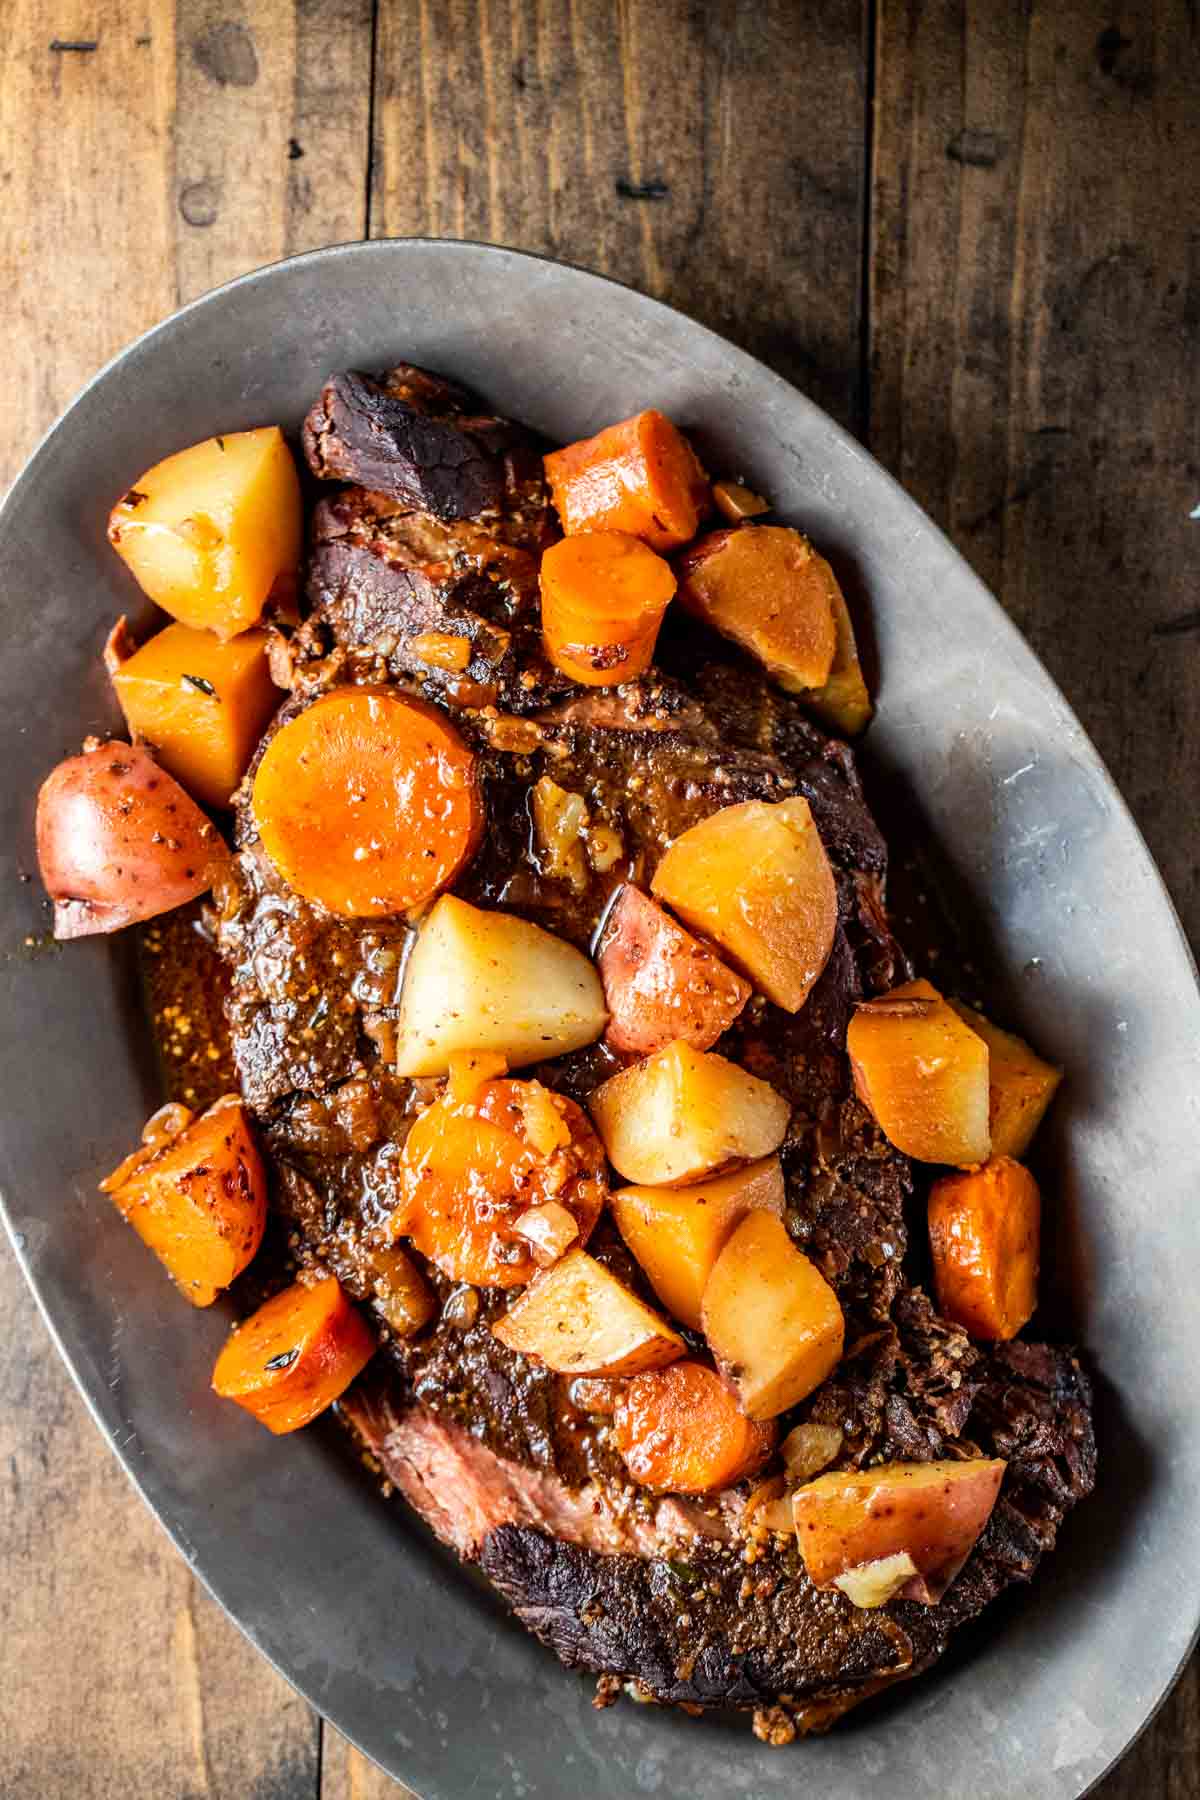 a large cooked piece of beef on a silver platter served with cooked carrots and potatoes